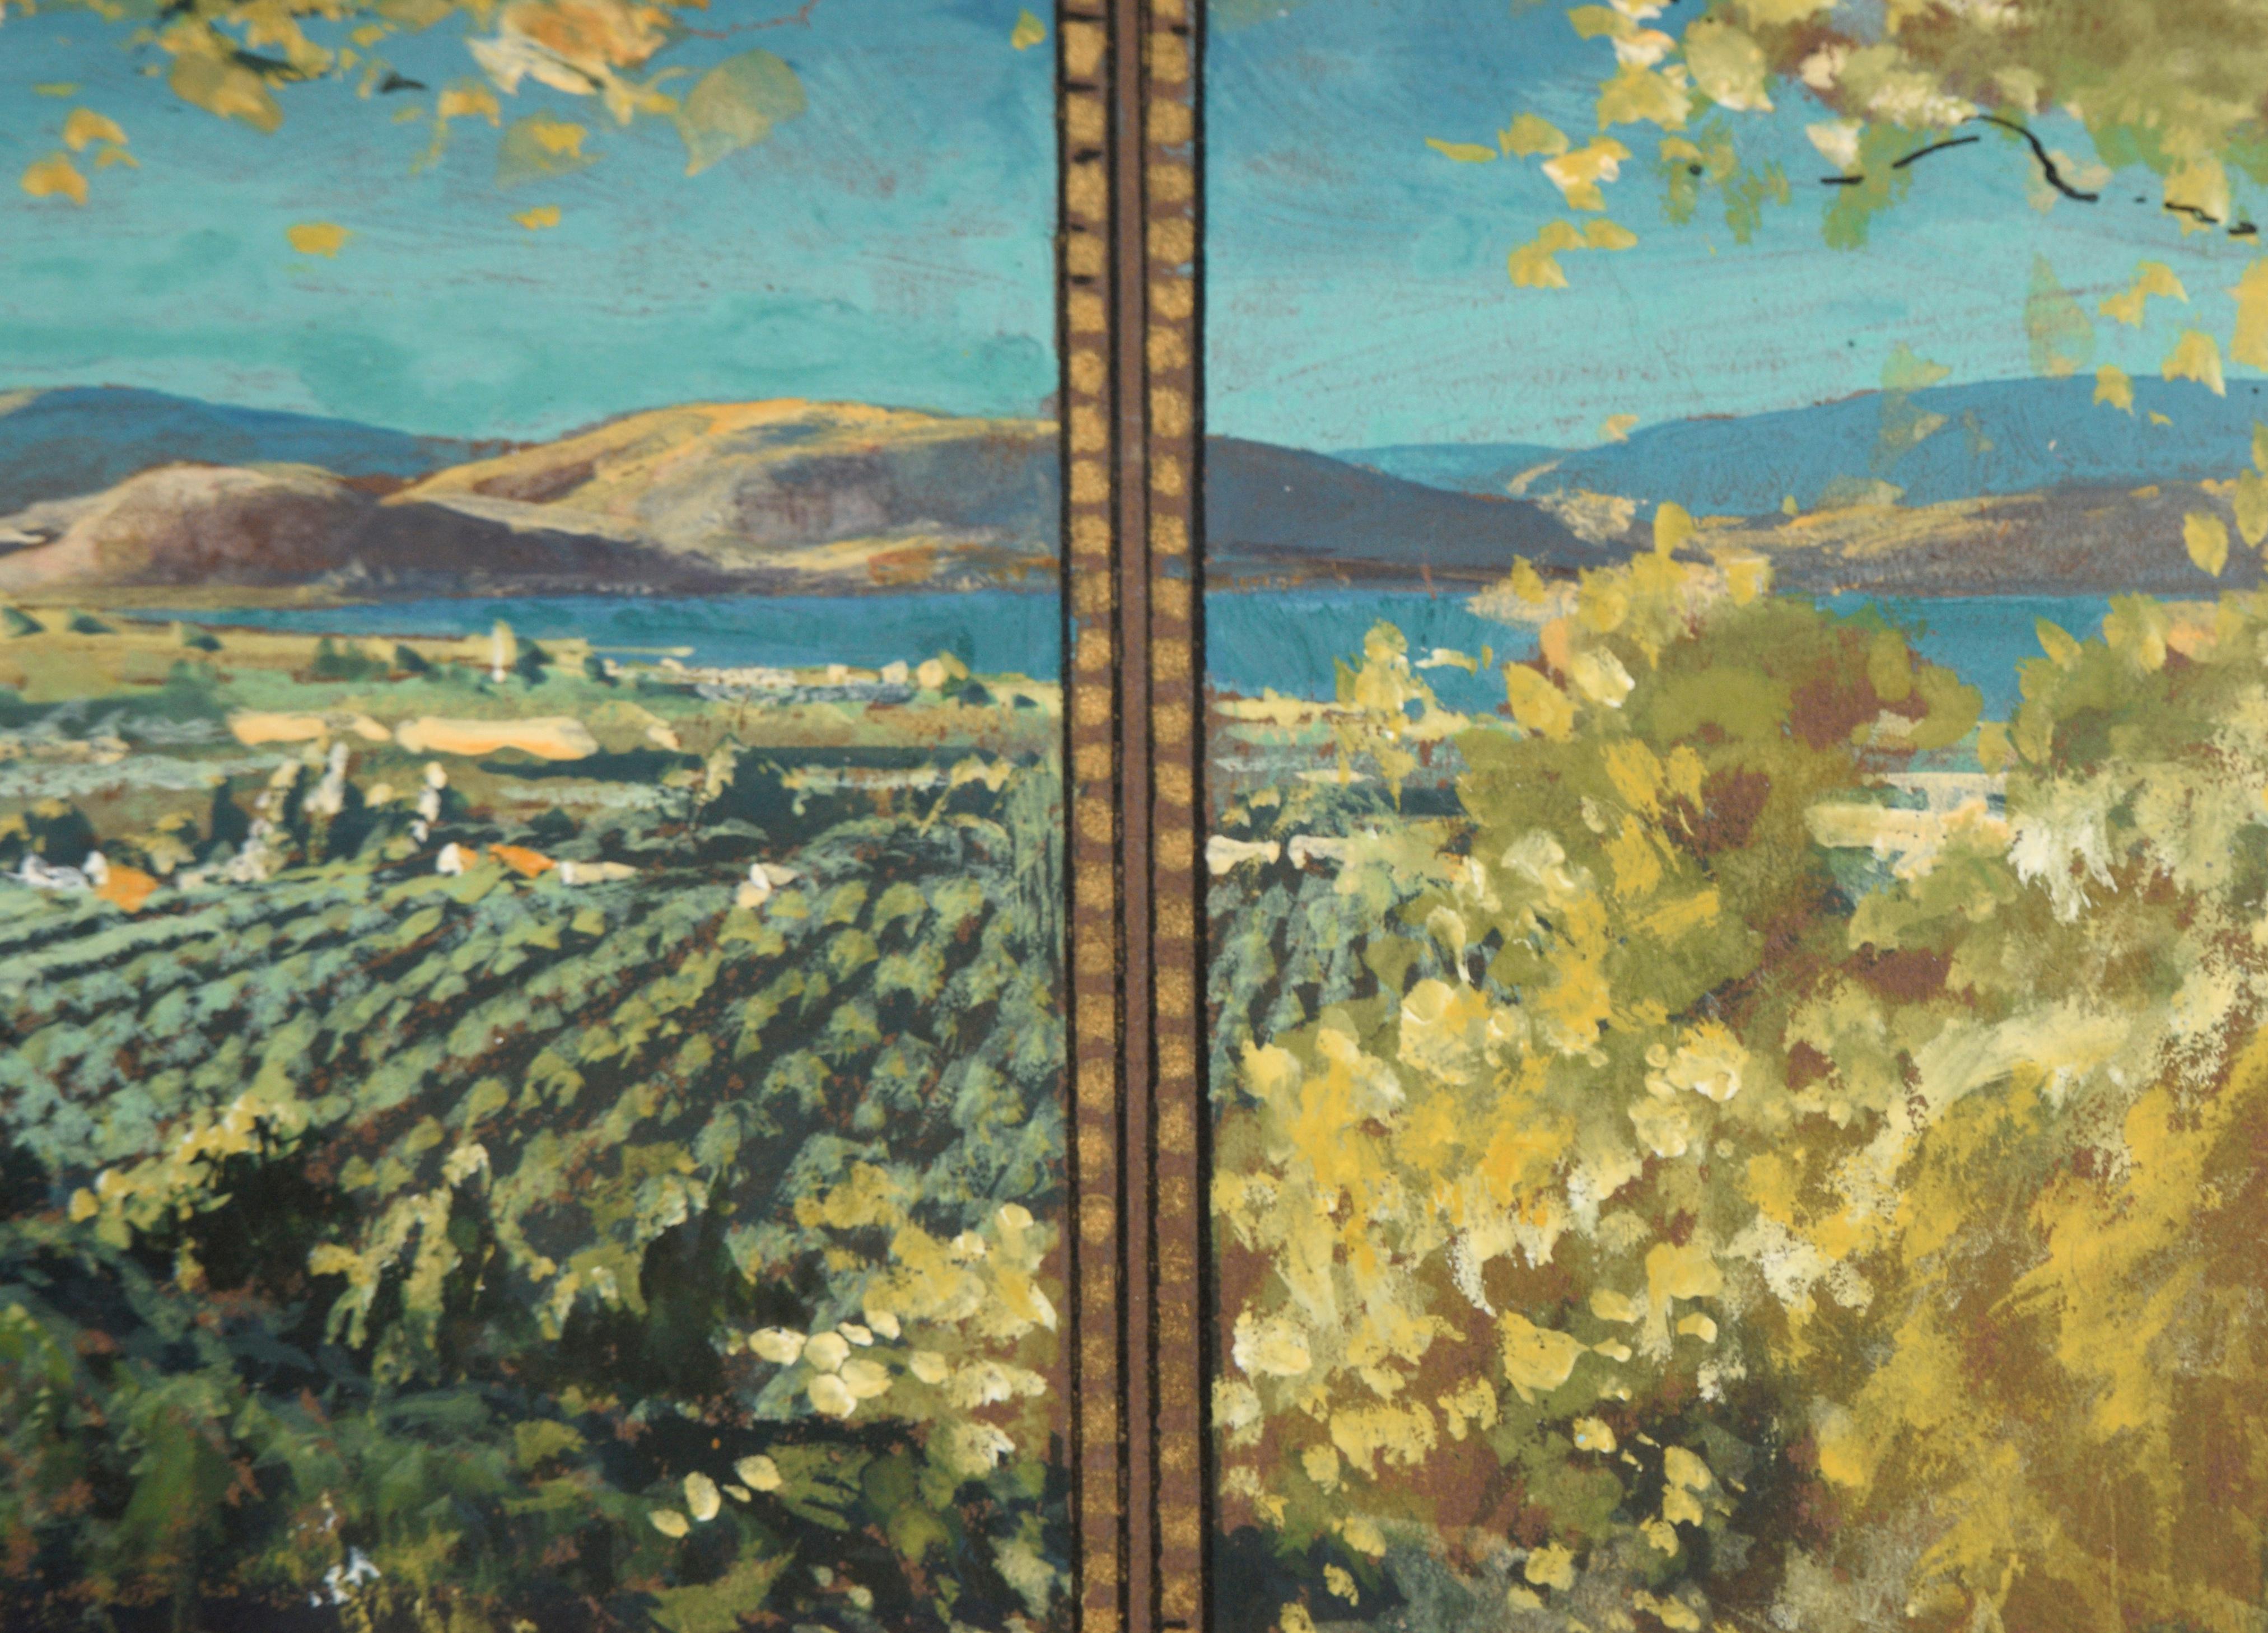 Looking Out Over the Vineyards, Early 20th Century Landscape Panorama  - Gold Landscape Painting by California School